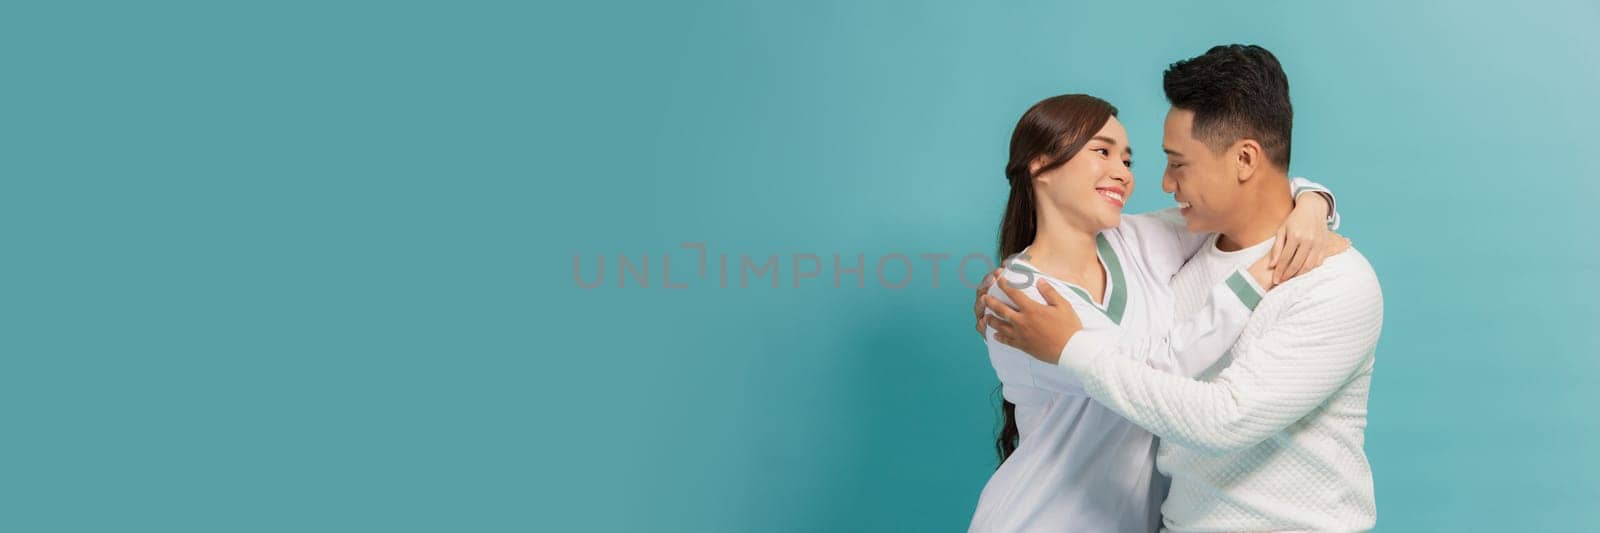 Her Prince Charming. Portrait of a young couple embracing isolated on a white background and embracing.